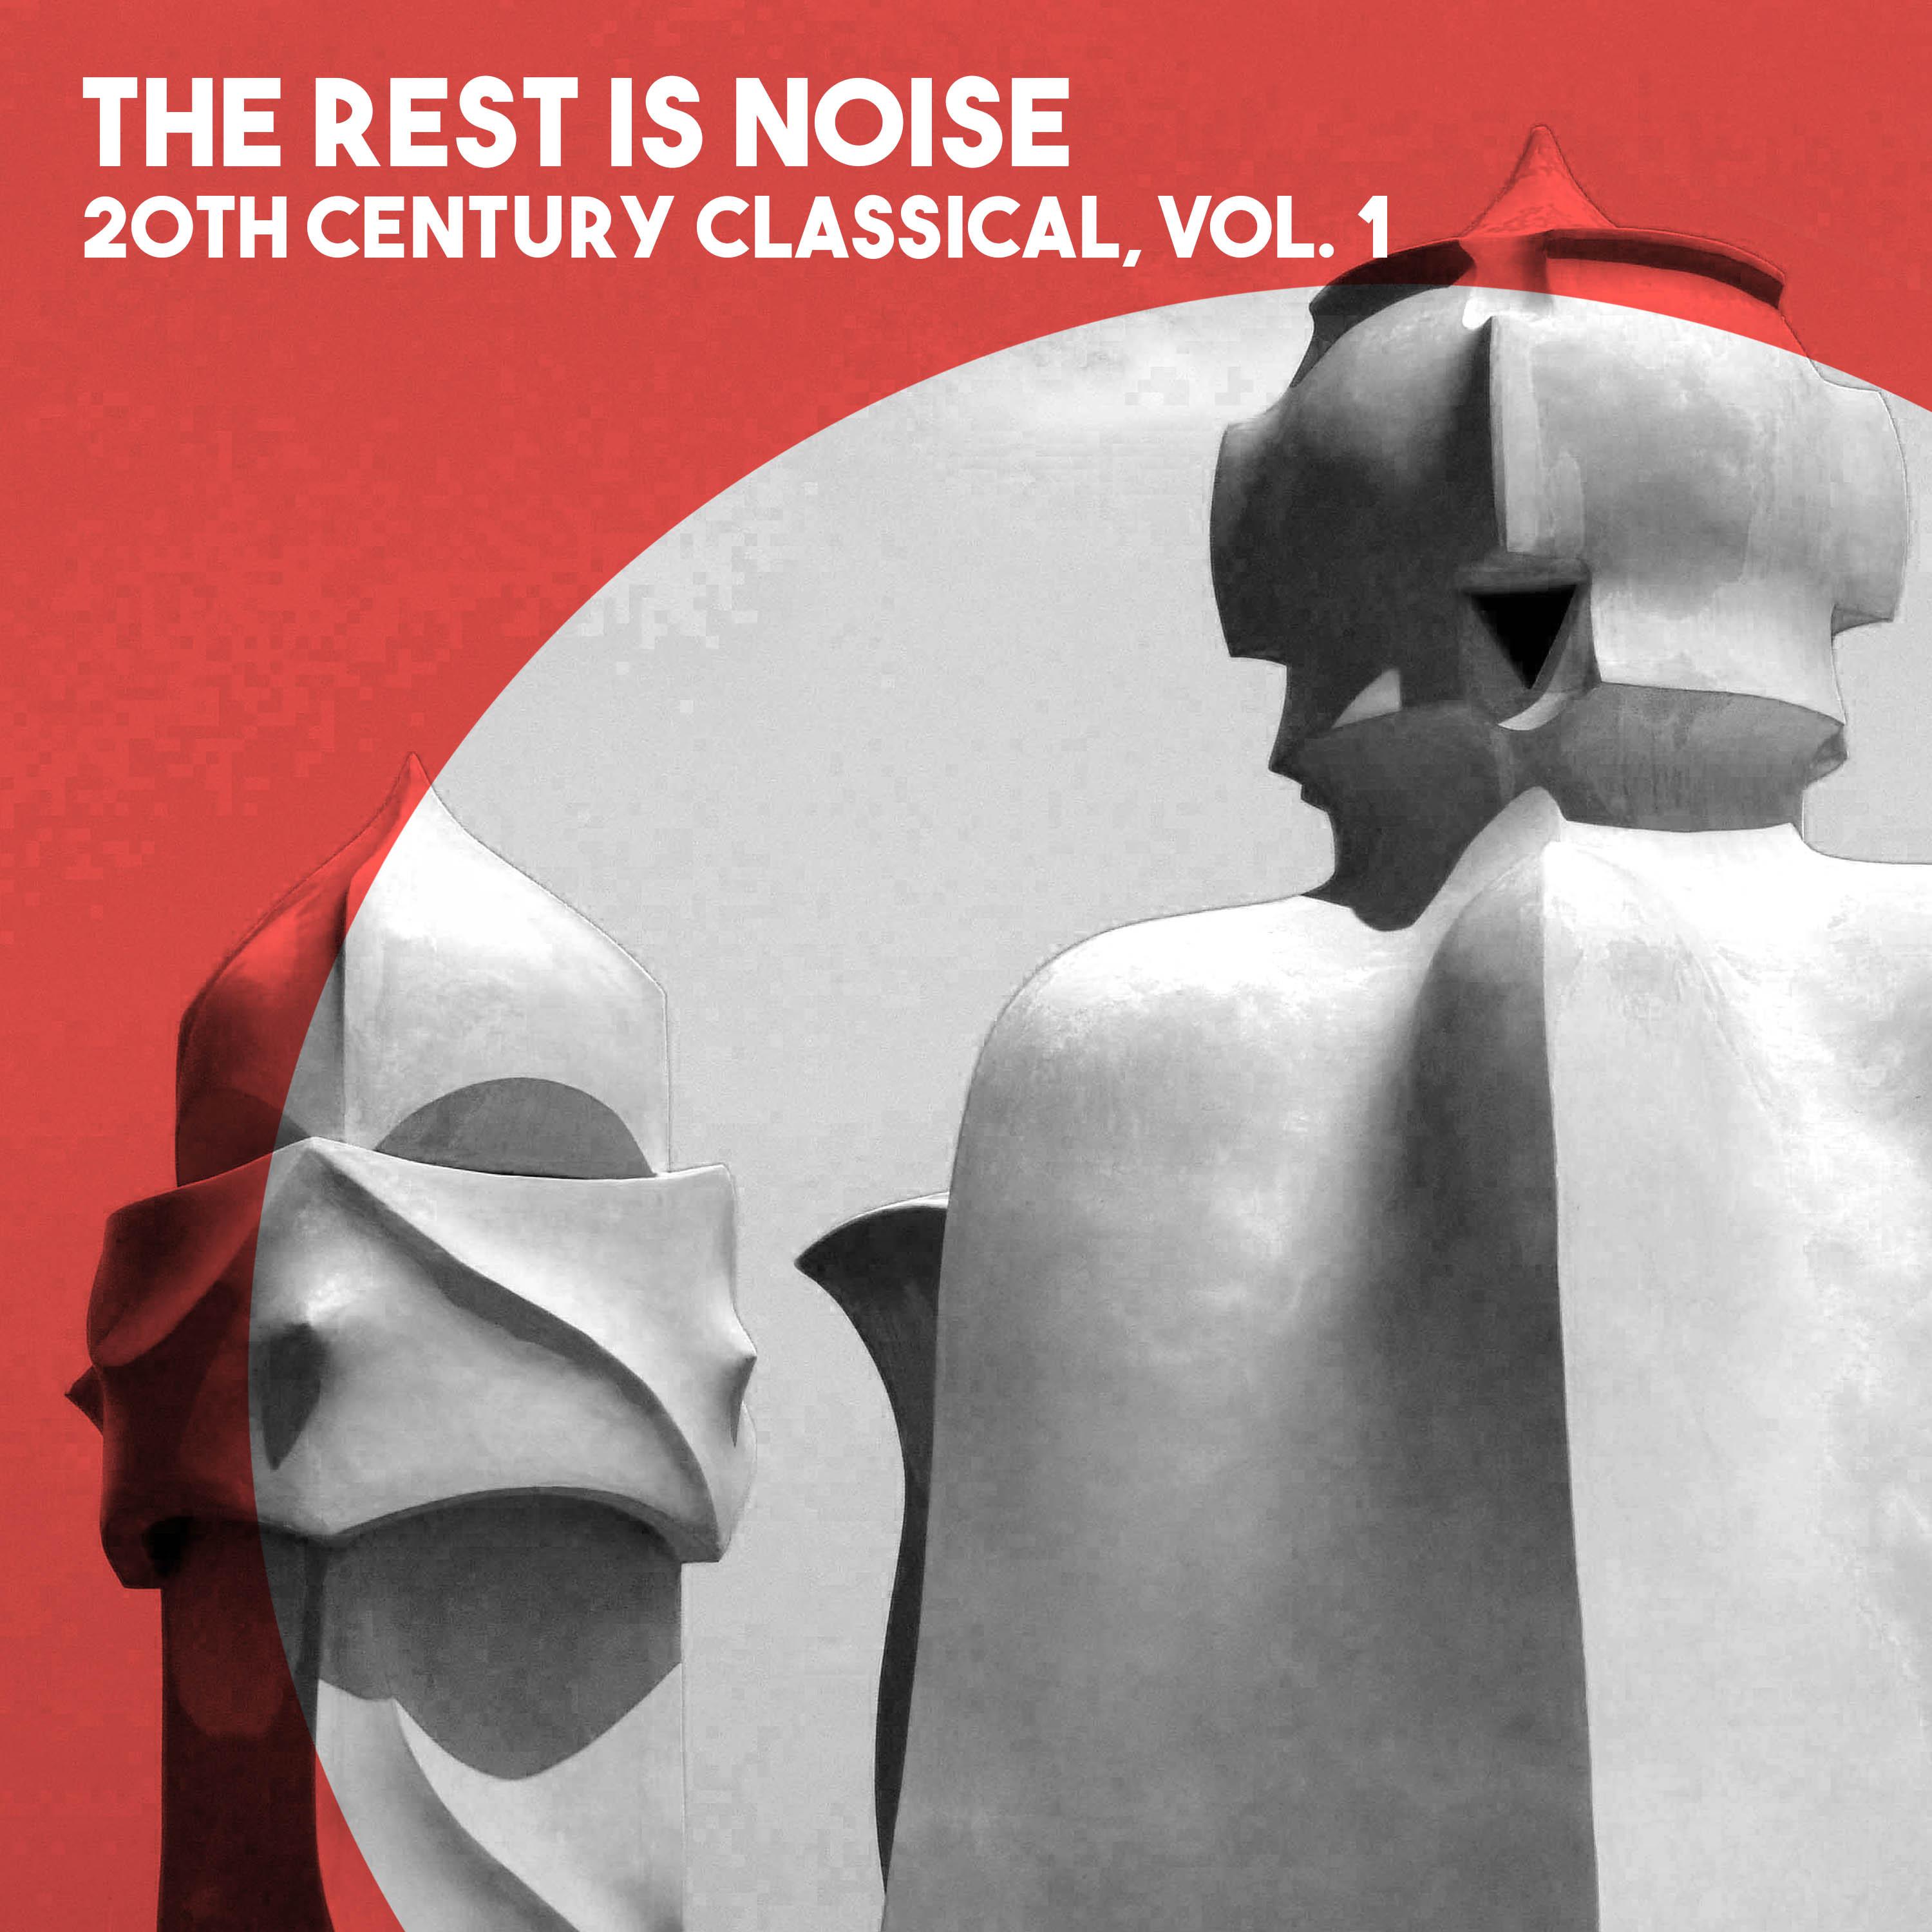 The Rest is Noise: 20th Century Classical, Vol. 1